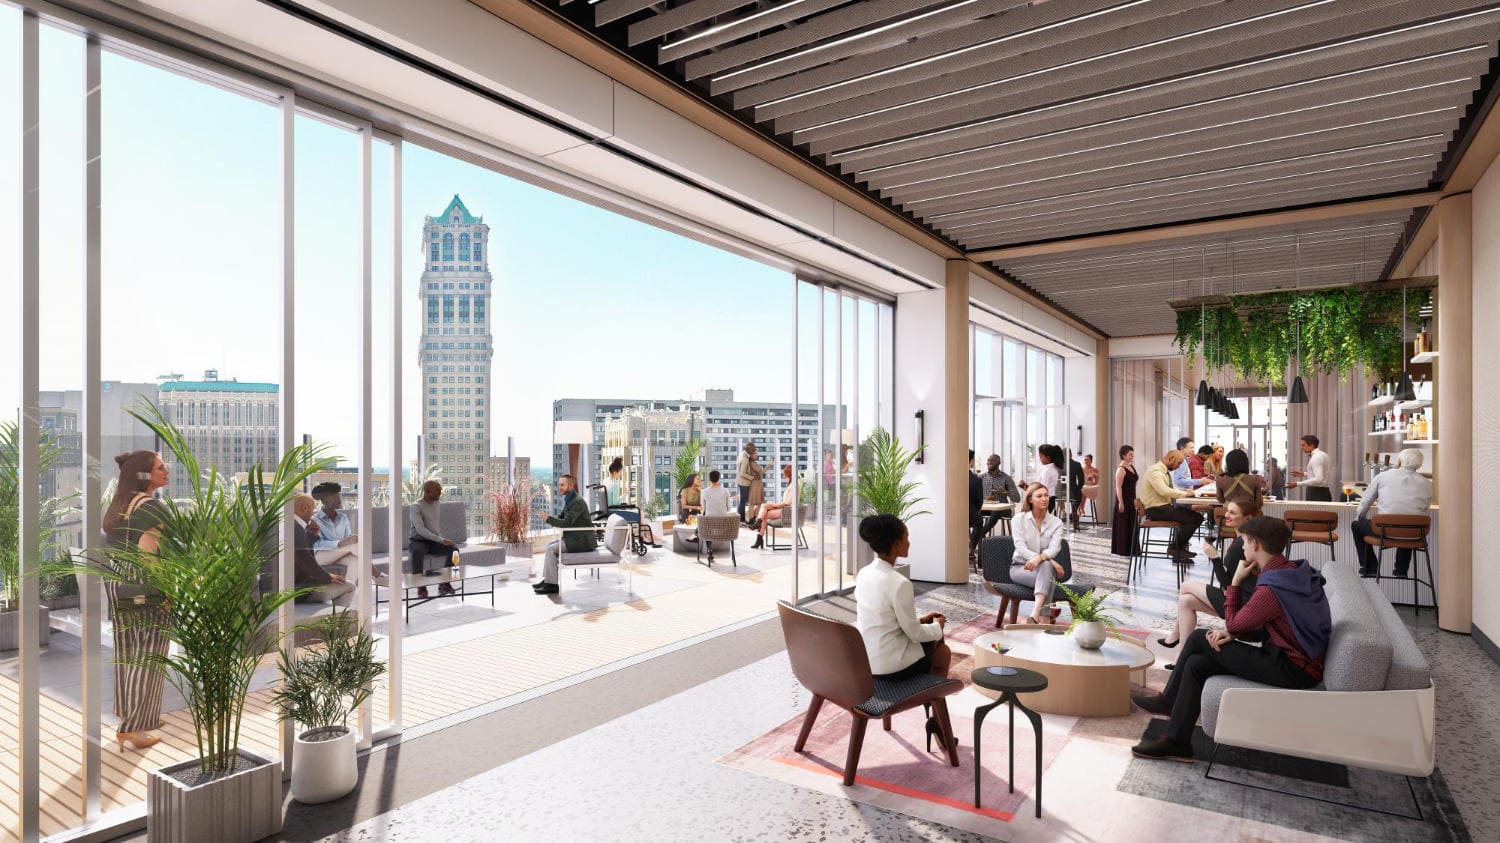 Fresh renderings reveal the Hudson's site office and event space